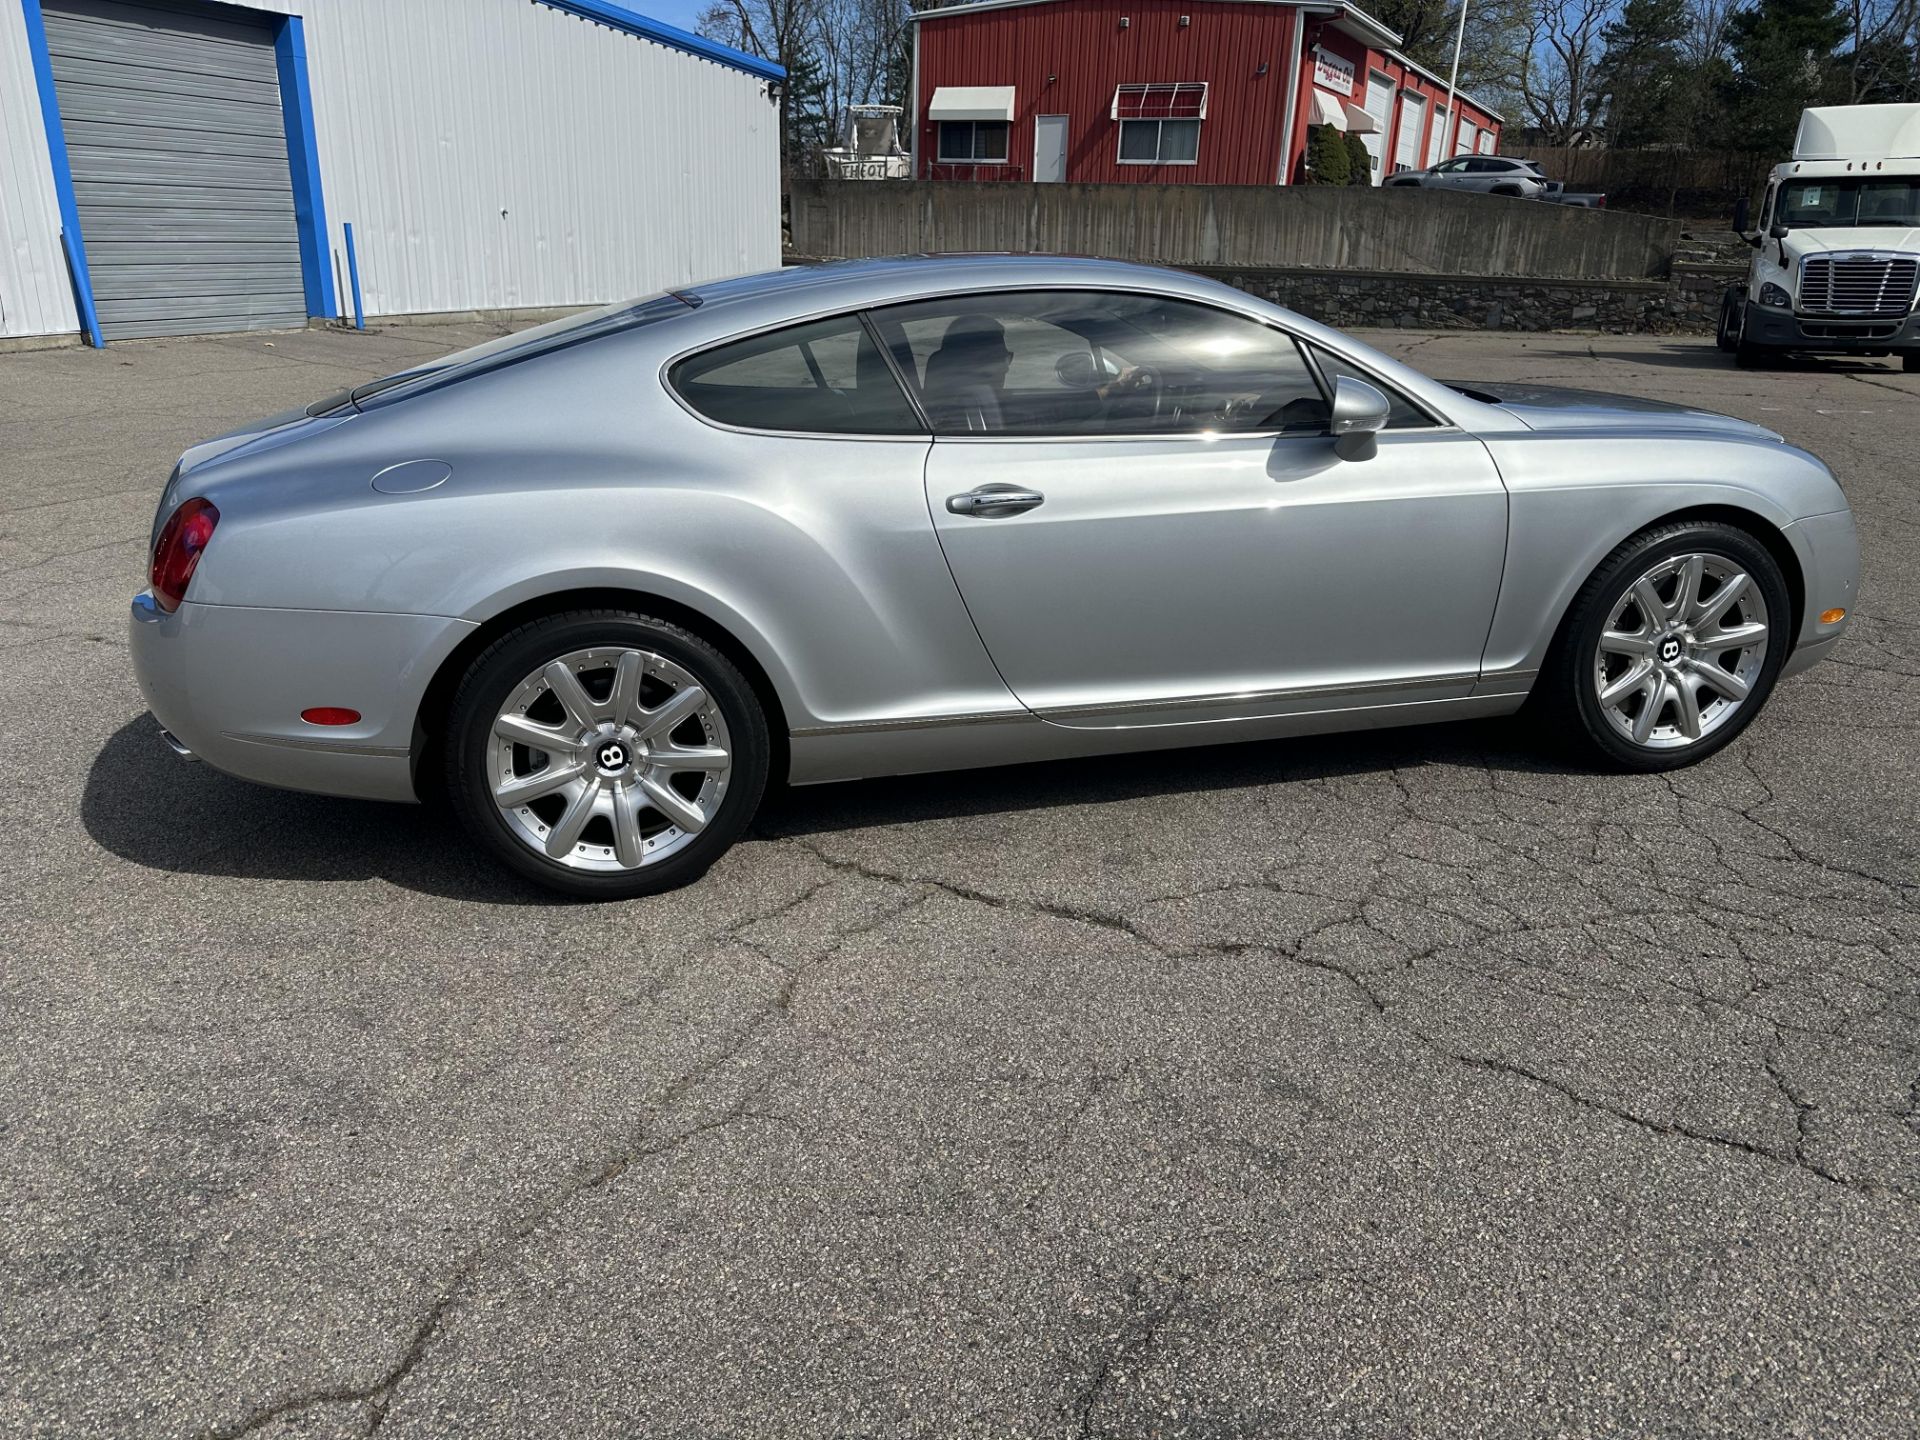 2005 Bentley Continental GT Coupe, Odom: 14,600, VIN#: SCBCR63W35C029782 - Image 2 of 24